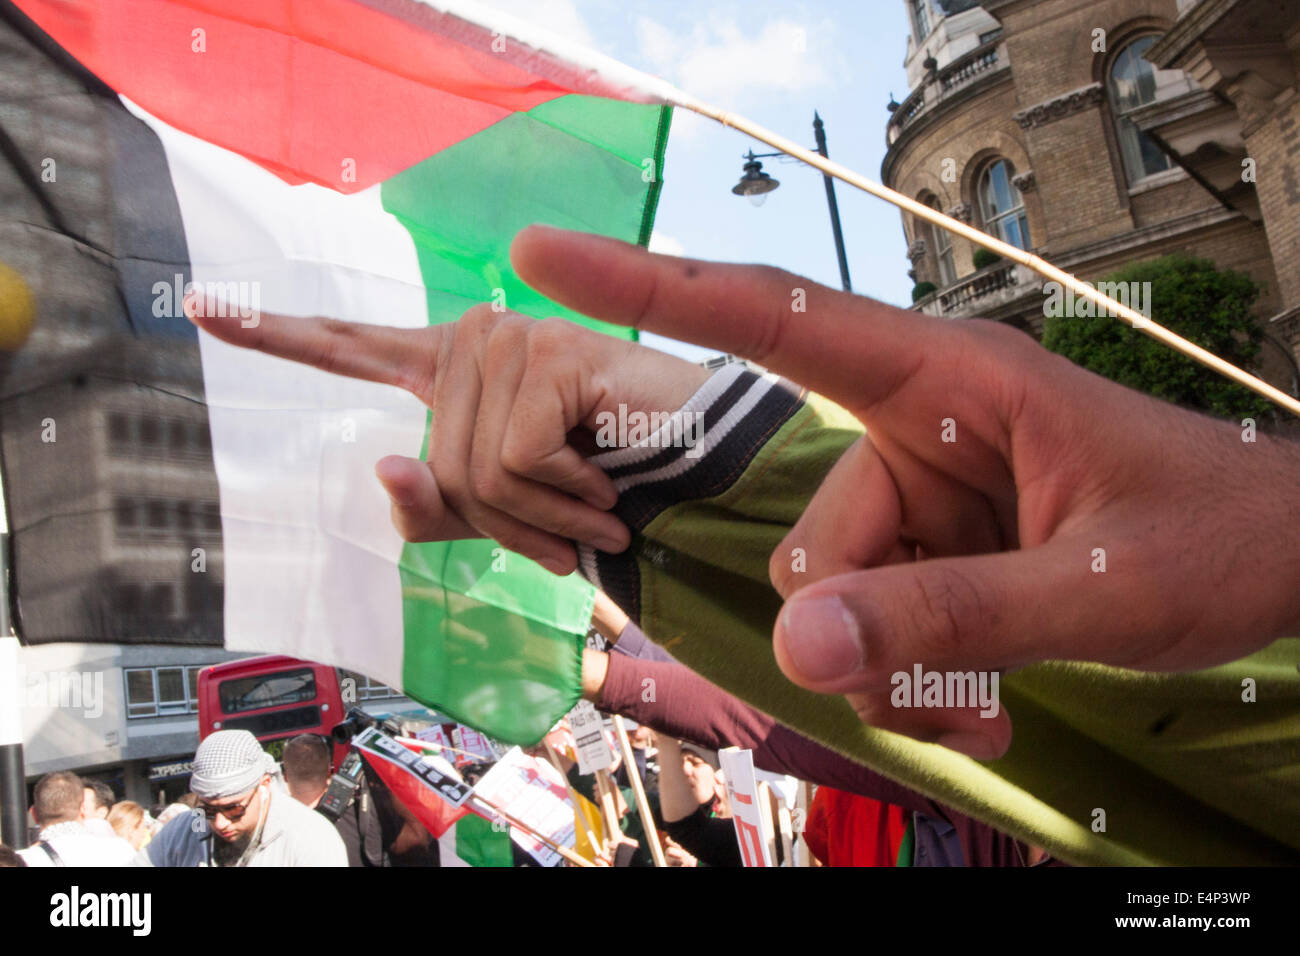 London, UK. 15th July, 2014. Angry fingers point at the BBC as Palestinians and their supporters demonstrate outside the BBC's headquarters against an alleged pro-Israeli bias in their coverage of Palestinian affairs. Credit:  Paul Davey/Alamy Live News Stock Photo